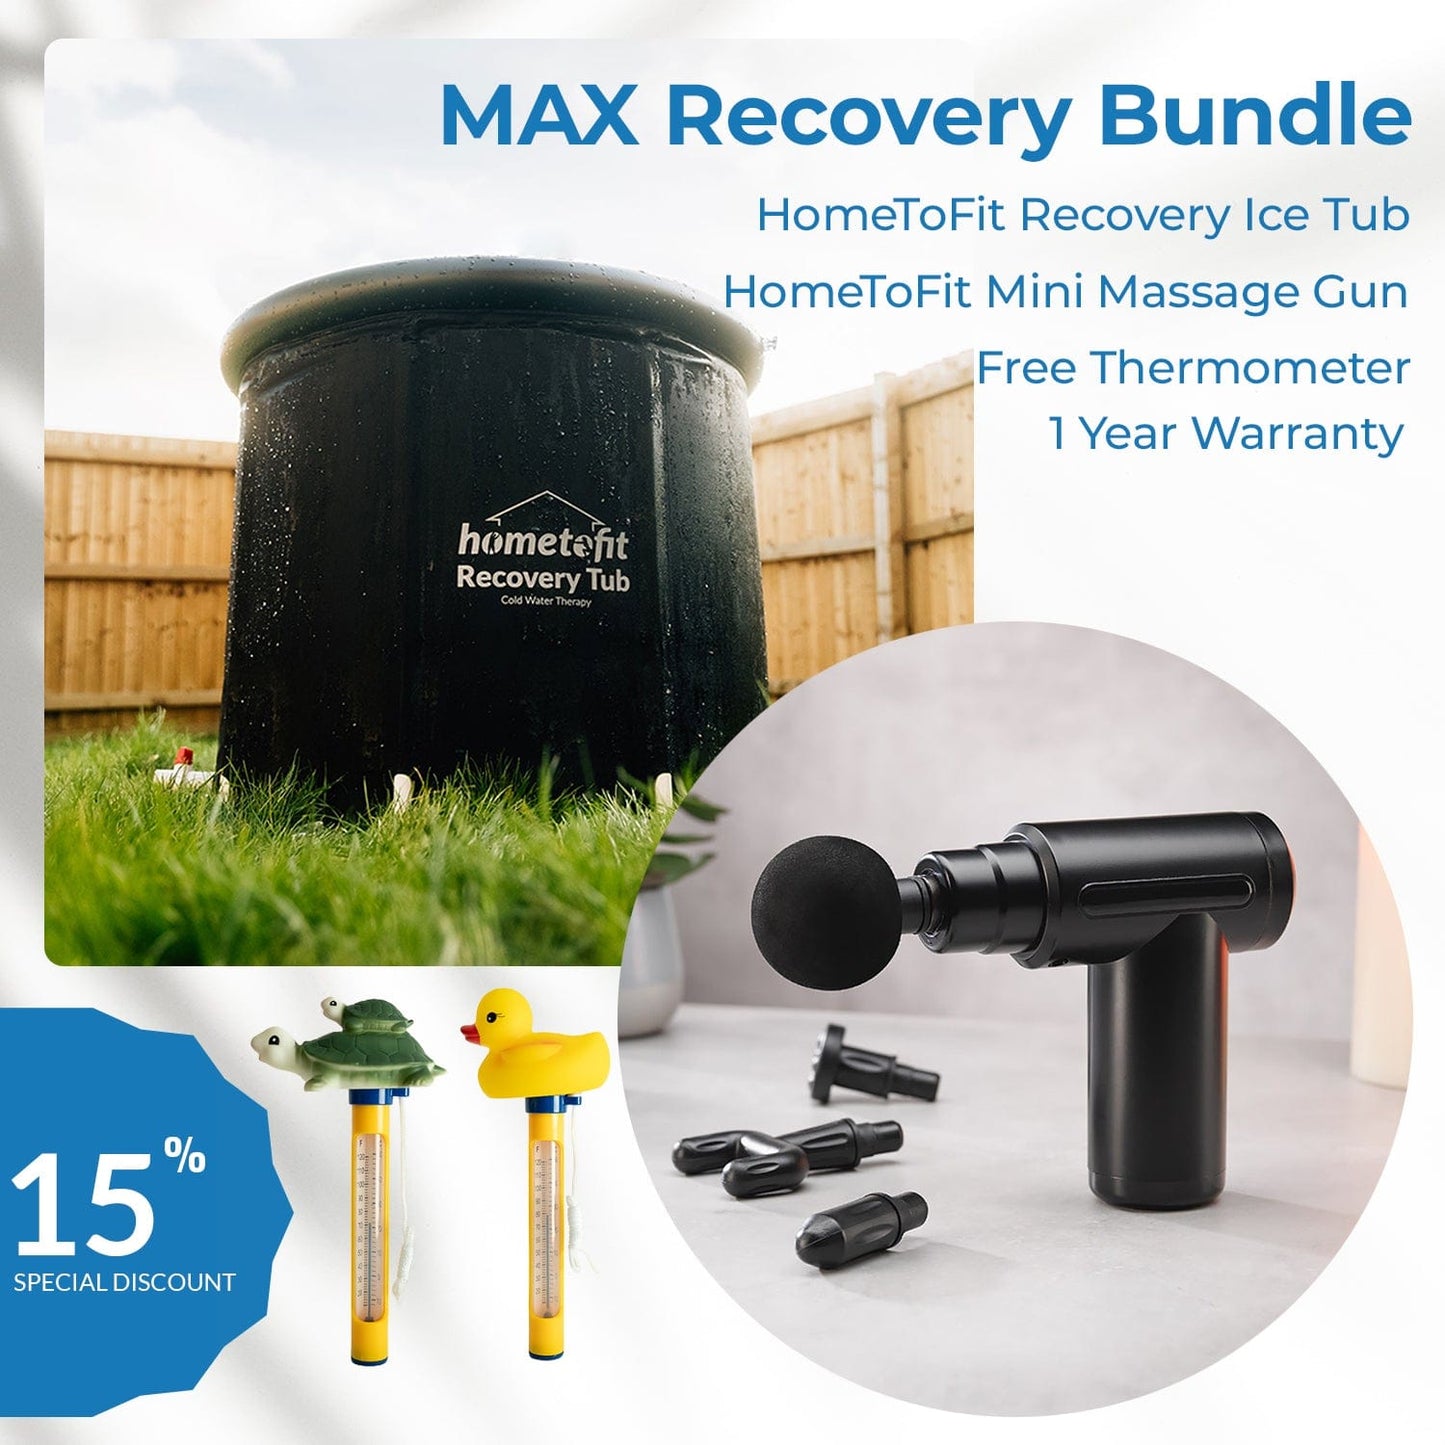 Max Recovery Bundle